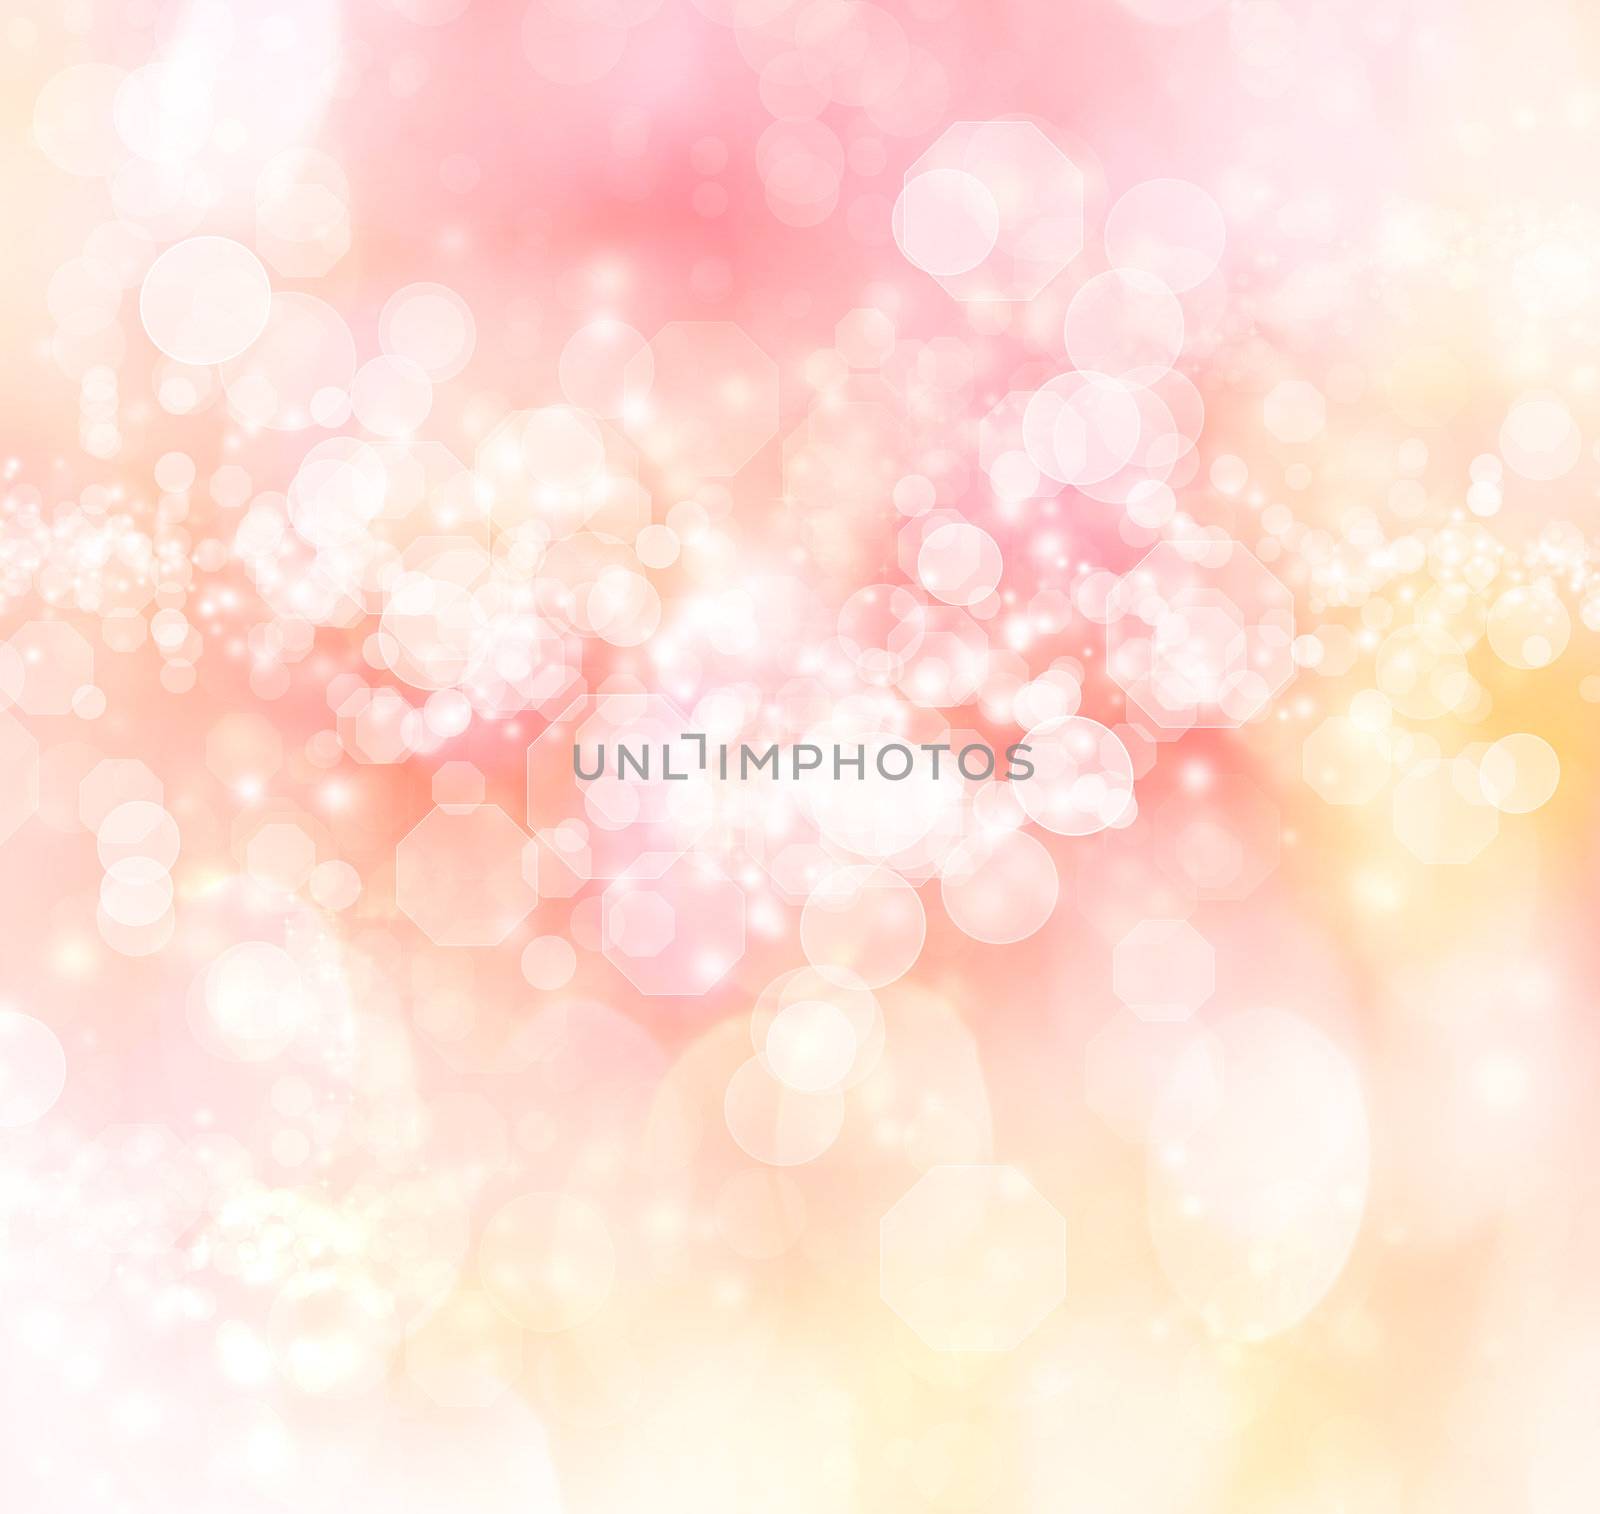 Light Colored Abstract Lights Background 